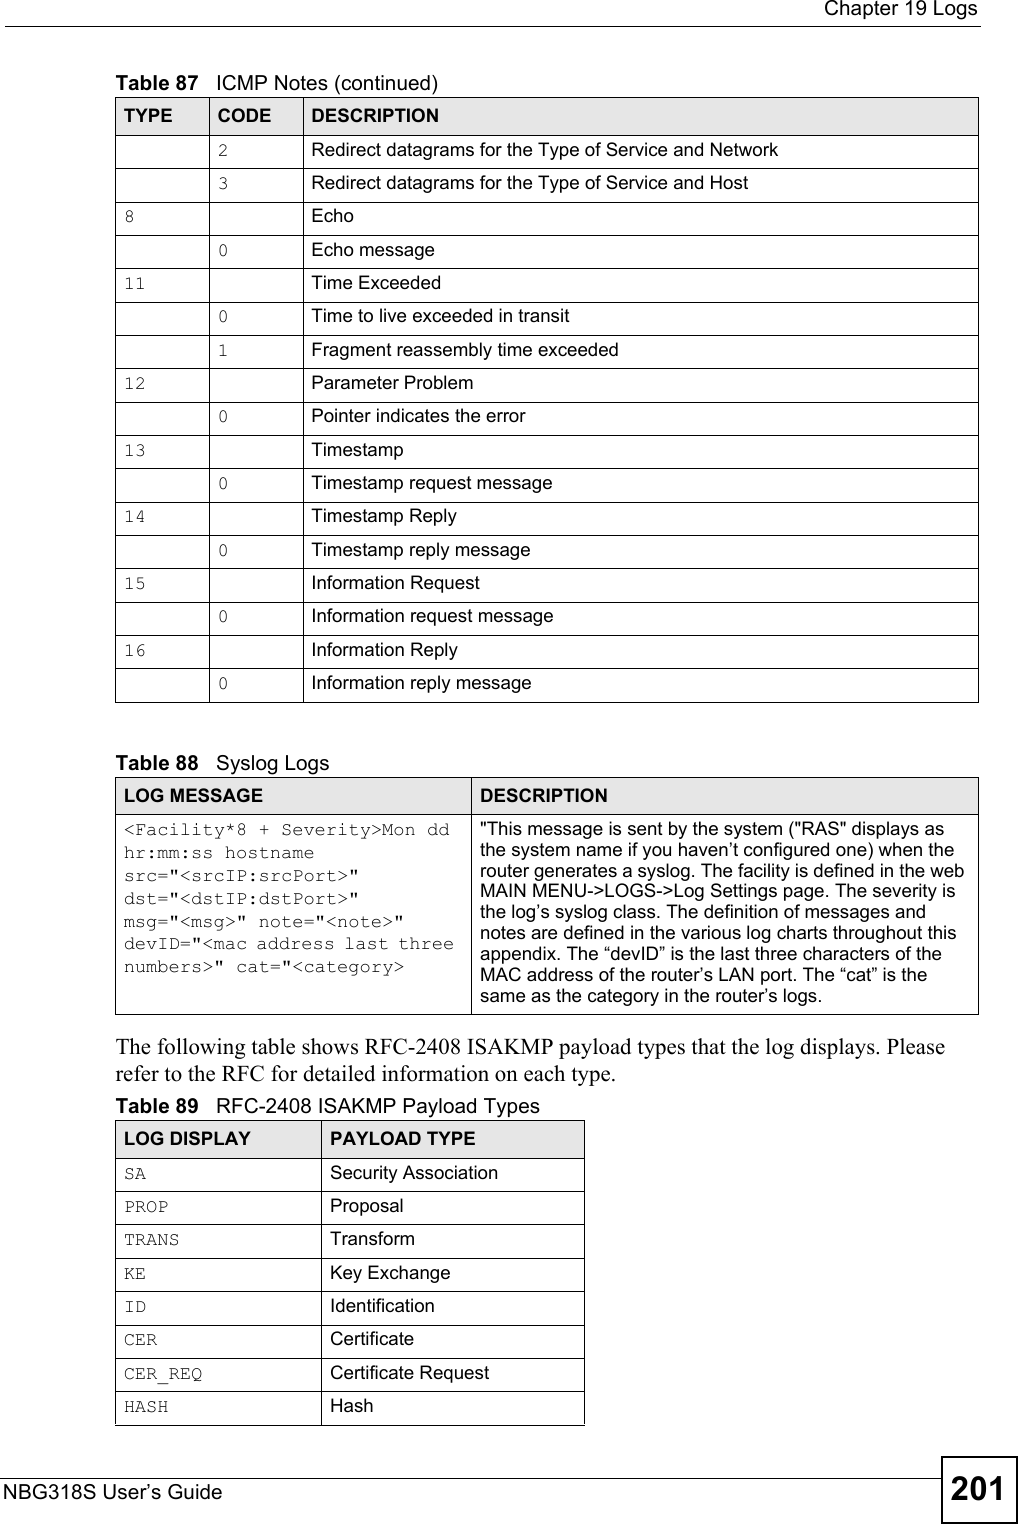  Chapter 19 LogsNBG318S User’s Guide 201 The following table shows RFC-2408 ISAKMP payload types that the log displays. Please refer to the RFC for detailed information on each type. 2Redirect datagrams for the Type of Service and Network3Redirect datagrams for the Type of Service and Host8Echo0Echo message11 Time Exceeded0Time to live exceeded in transit1Fragment reassembly time exceeded12 Parameter Problem0Pointer indicates the error13 Timestamp0Timestamp request message14 Timestamp Reply0Timestamp reply message15 Information Request0Information request message16 Information Reply0Information reply messageTable 88   Syslog LogsLOG MESSAGE DESCRIPTION&lt;Facility*8 + Severity&gt;Mon dd hr:mm:ss hostname src=&quot;&lt;srcIP:srcPort&gt;&quot; dst=&quot;&lt;dstIP:dstPort&gt;&quot; msg=&quot;&lt;msg&gt;&quot; note=&quot;&lt;note&gt;&quot; devID=&quot;&lt;mac address last three numbers&gt;&quot; cat=&quot;&lt;category&gt;&quot;This message is sent by the system (&quot;RAS&quot; displays as the system name if you haven’t configured one) when the router generates a syslog. The facility is defined in the web MAIN MENU-&gt;LOGS-&gt;Log Settings page. The severity is the log’s syslog class. The definition of messages and notes are defined in the various log charts throughout this appendix. The “devID” is the last three characters of the MAC address of the router’s LAN port. The “cat” is the same as the category in the router’s logs.Table 89   RFC-2408 ISAKMP Payload TypesLOG DISPLAY PAYLOAD TYPESA Security AssociationPROP ProposalTRANS TransformKE Key ExchangeID IdentificationCER CertificateCER_REQ Certificate RequestHASH HashTable 87   ICMP Notes (continued)TYPE CODE DESCRIPTION